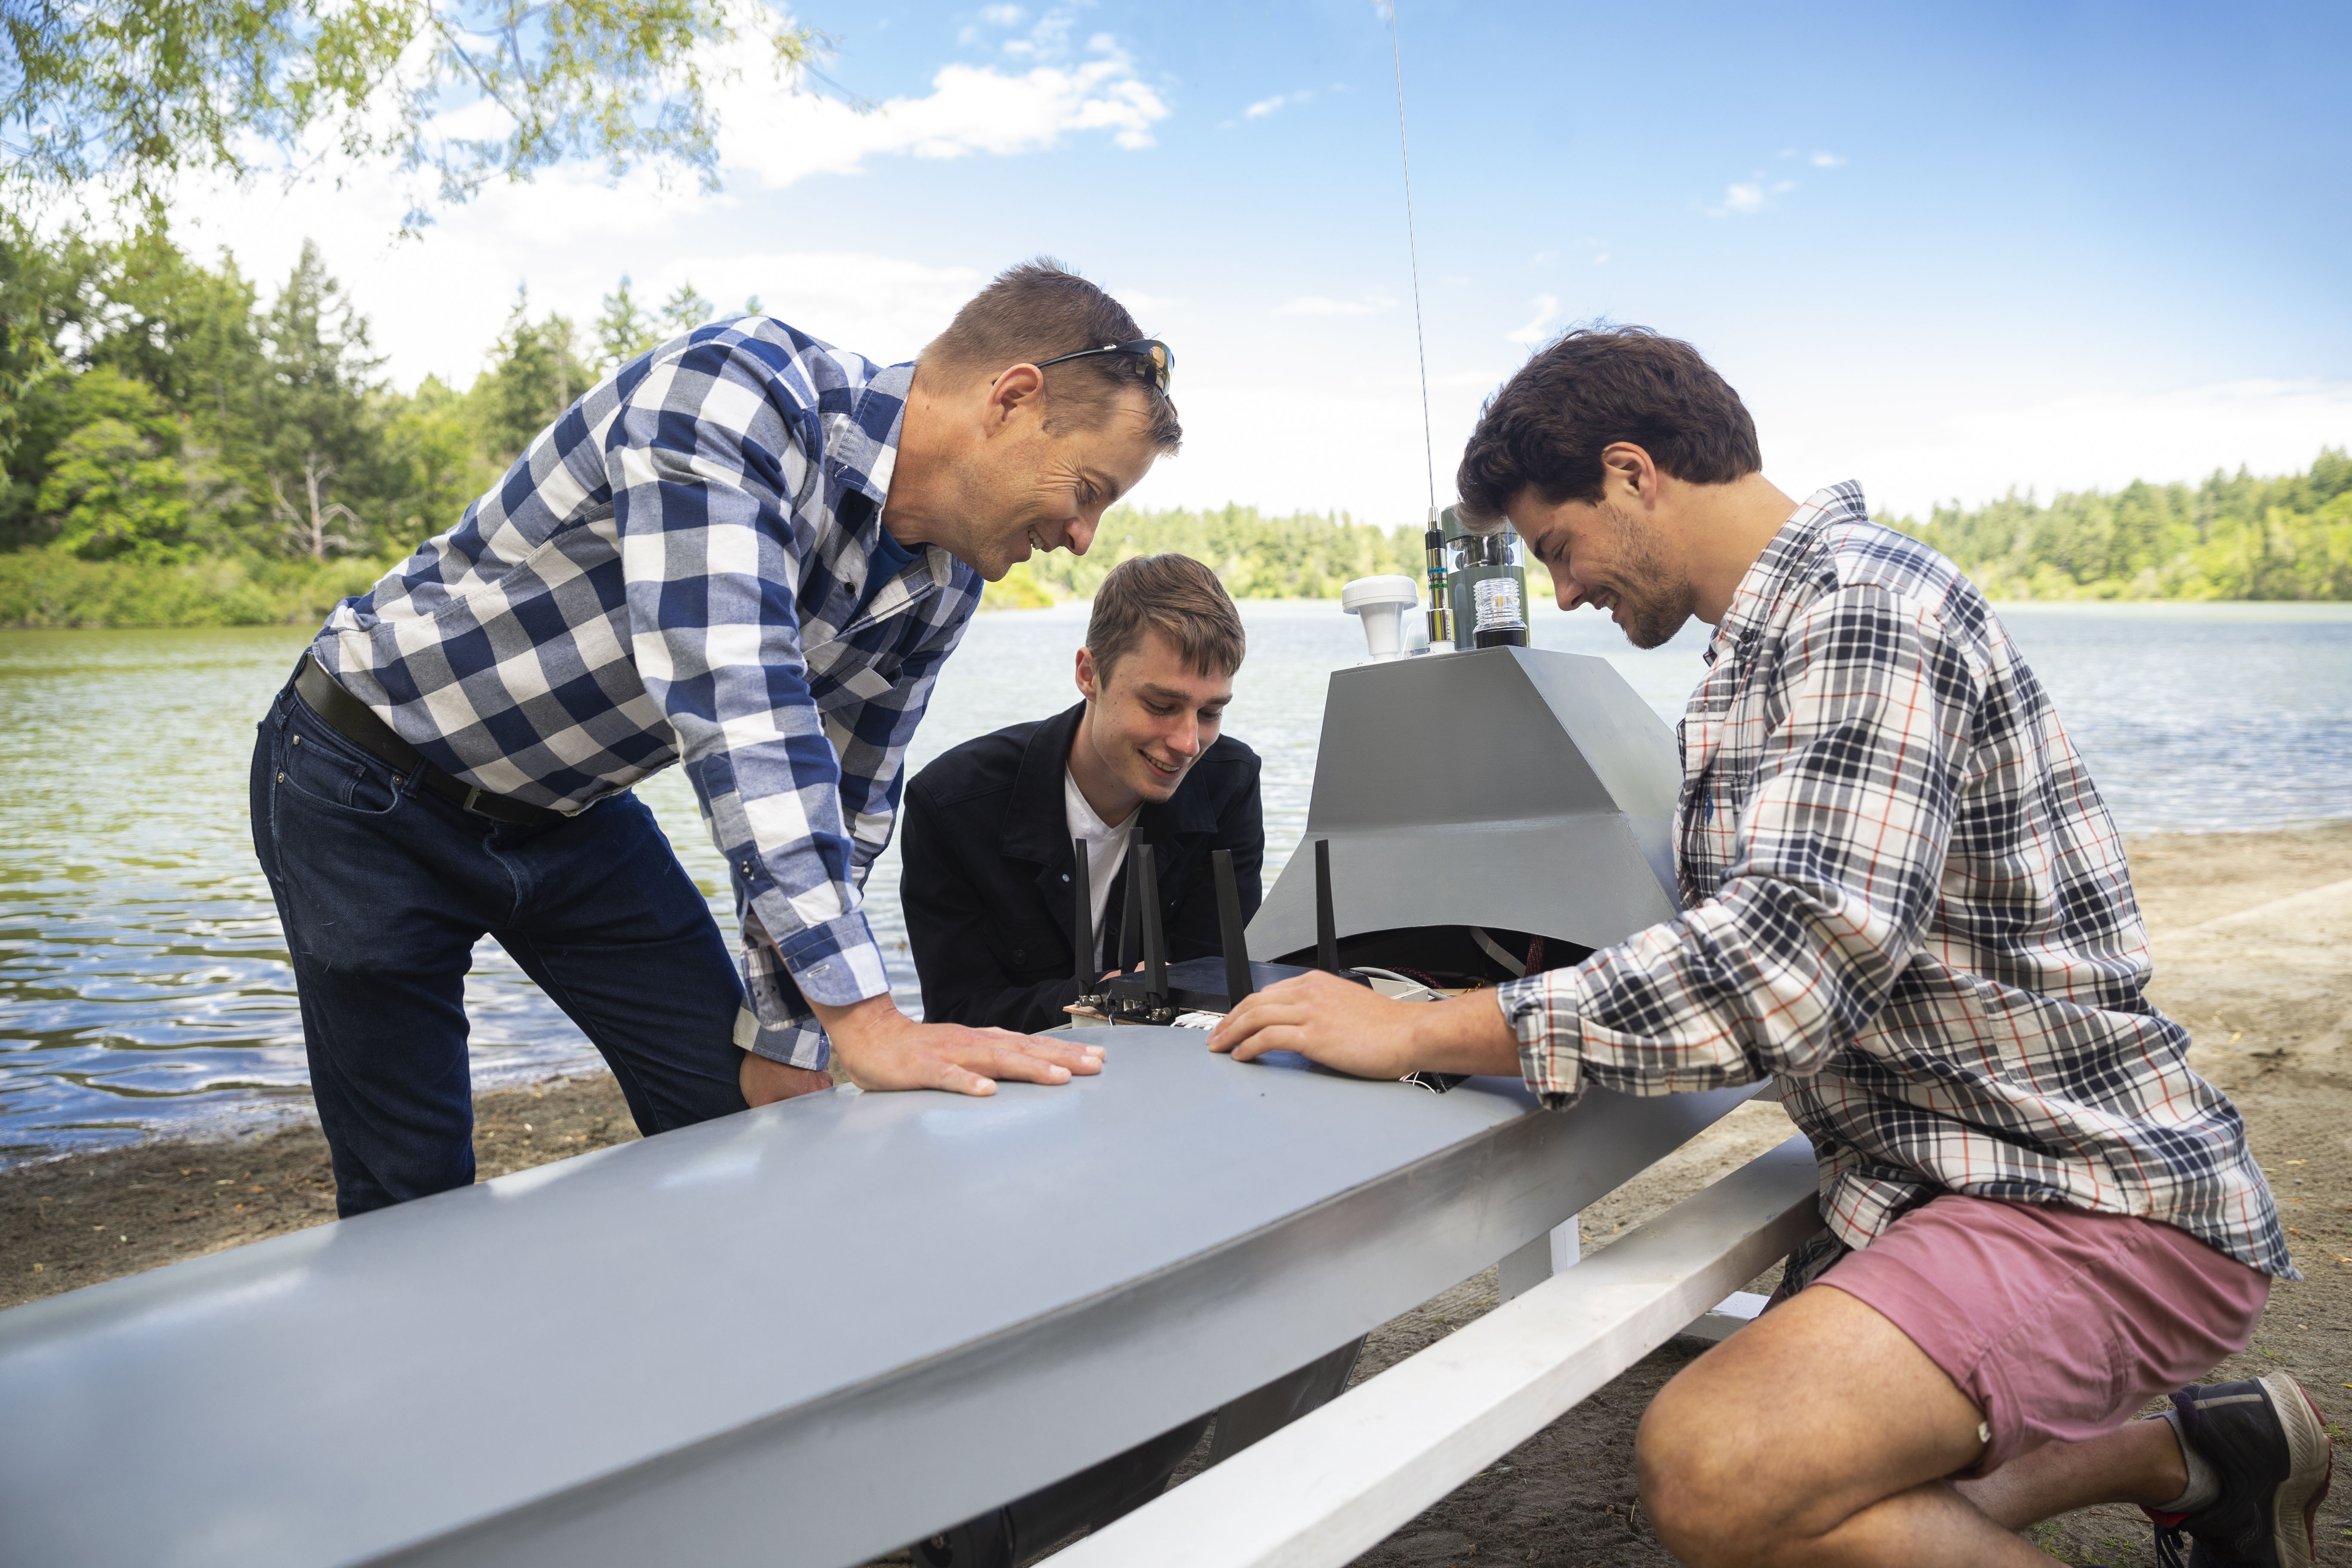 Two students and an employer look at the controls on an autonomous water vehicle that can collect environmental data. The vehicle sits on a small beach and there is water behind it. They are preparing to launch.